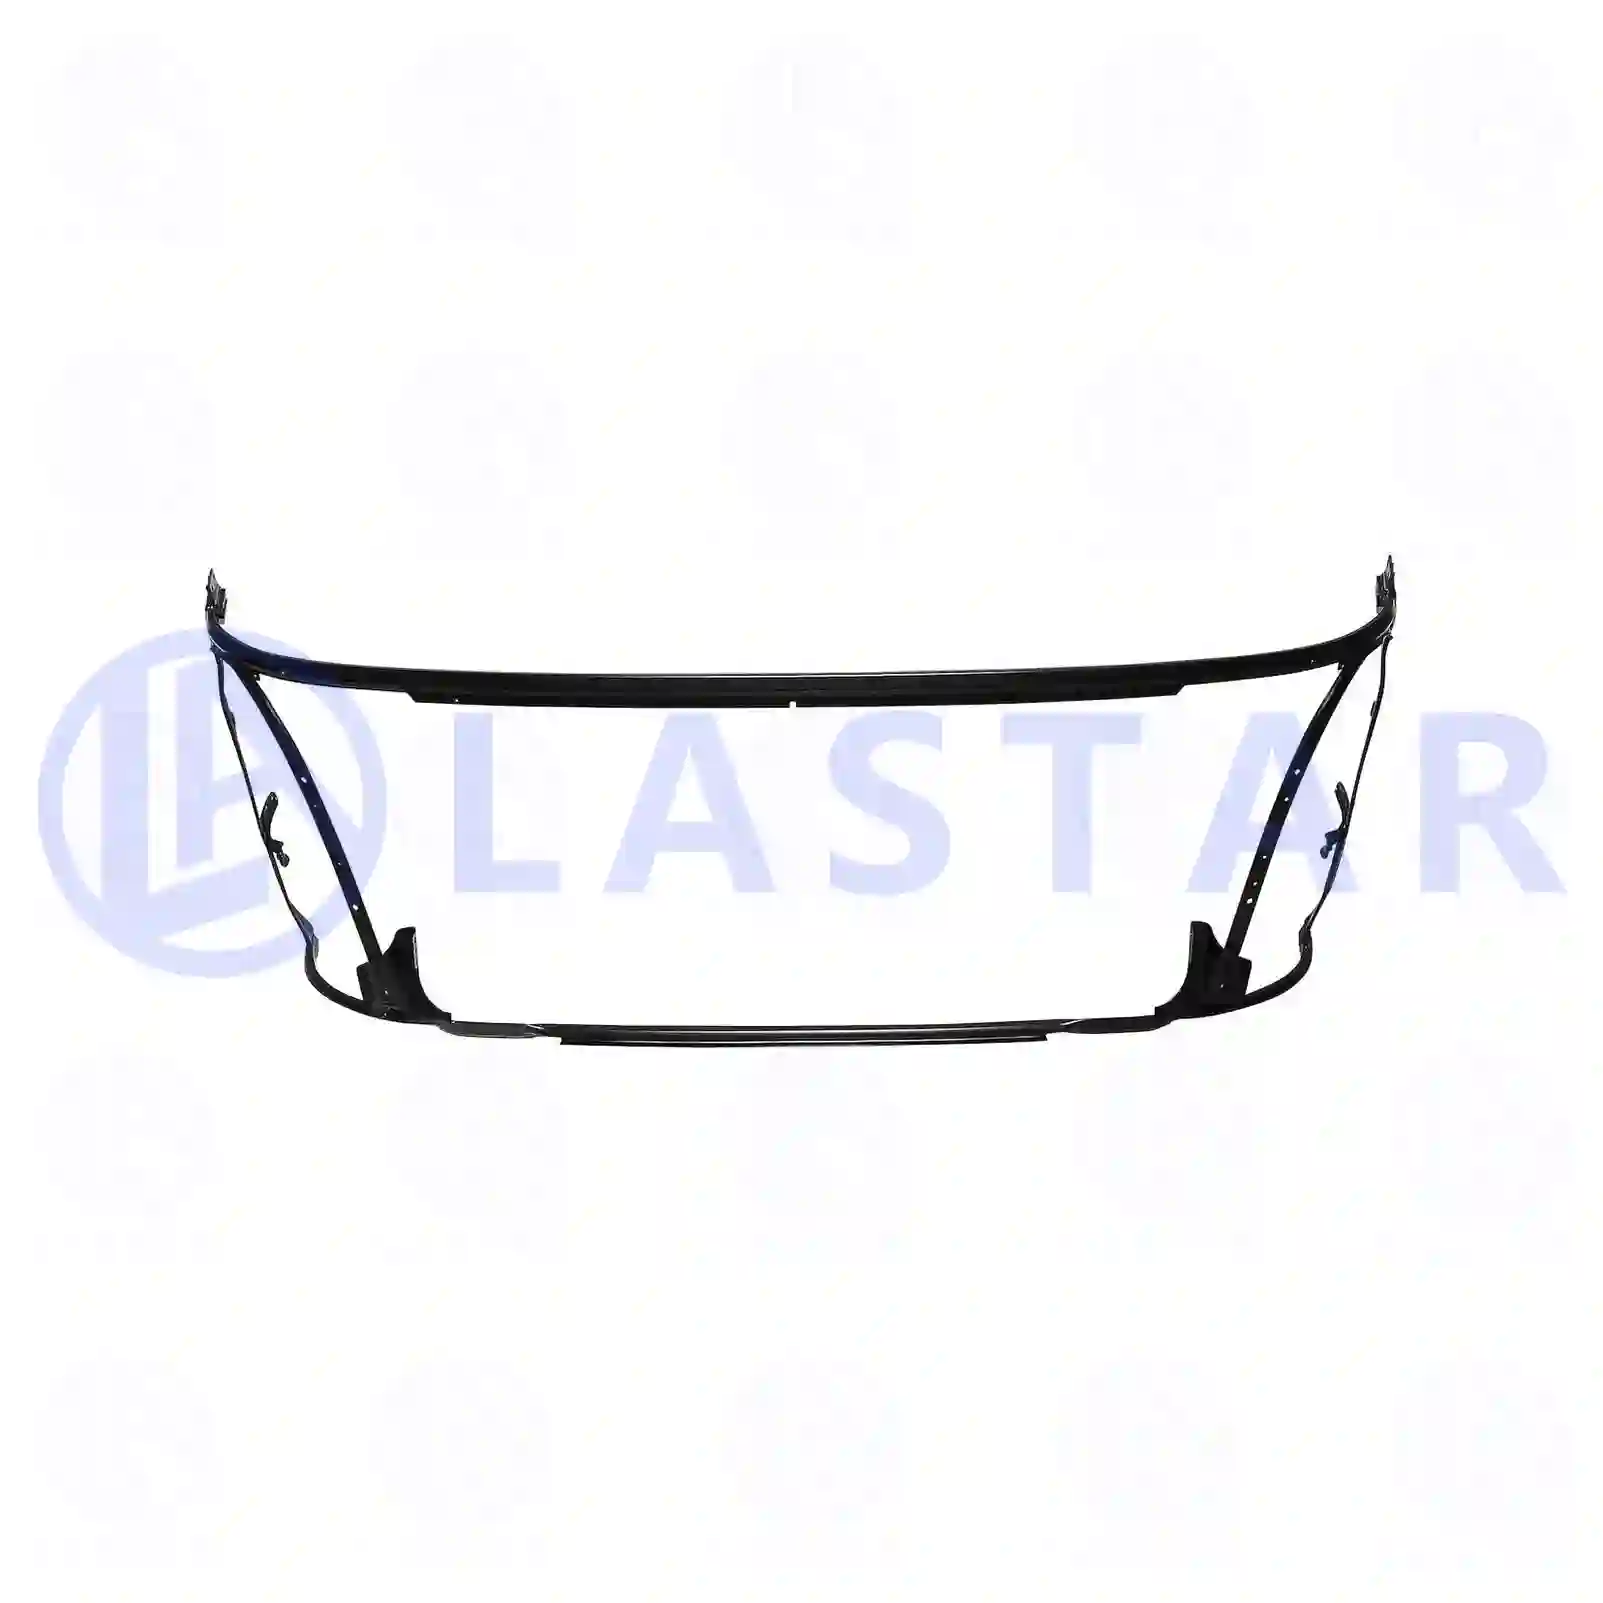 Frame, front flap, 77718618, 1804628, 1859174, 1917216, 2269451, ZG60767-0008 ||  77718618 Lastar Spare Part | Truck Spare Parts, Auotomotive Spare Parts Frame, front flap, 77718618, 1804628, 1859174, 1917216, 2269451, ZG60767-0008 ||  77718618 Lastar Spare Part | Truck Spare Parts, Auotomotive Spare Parts